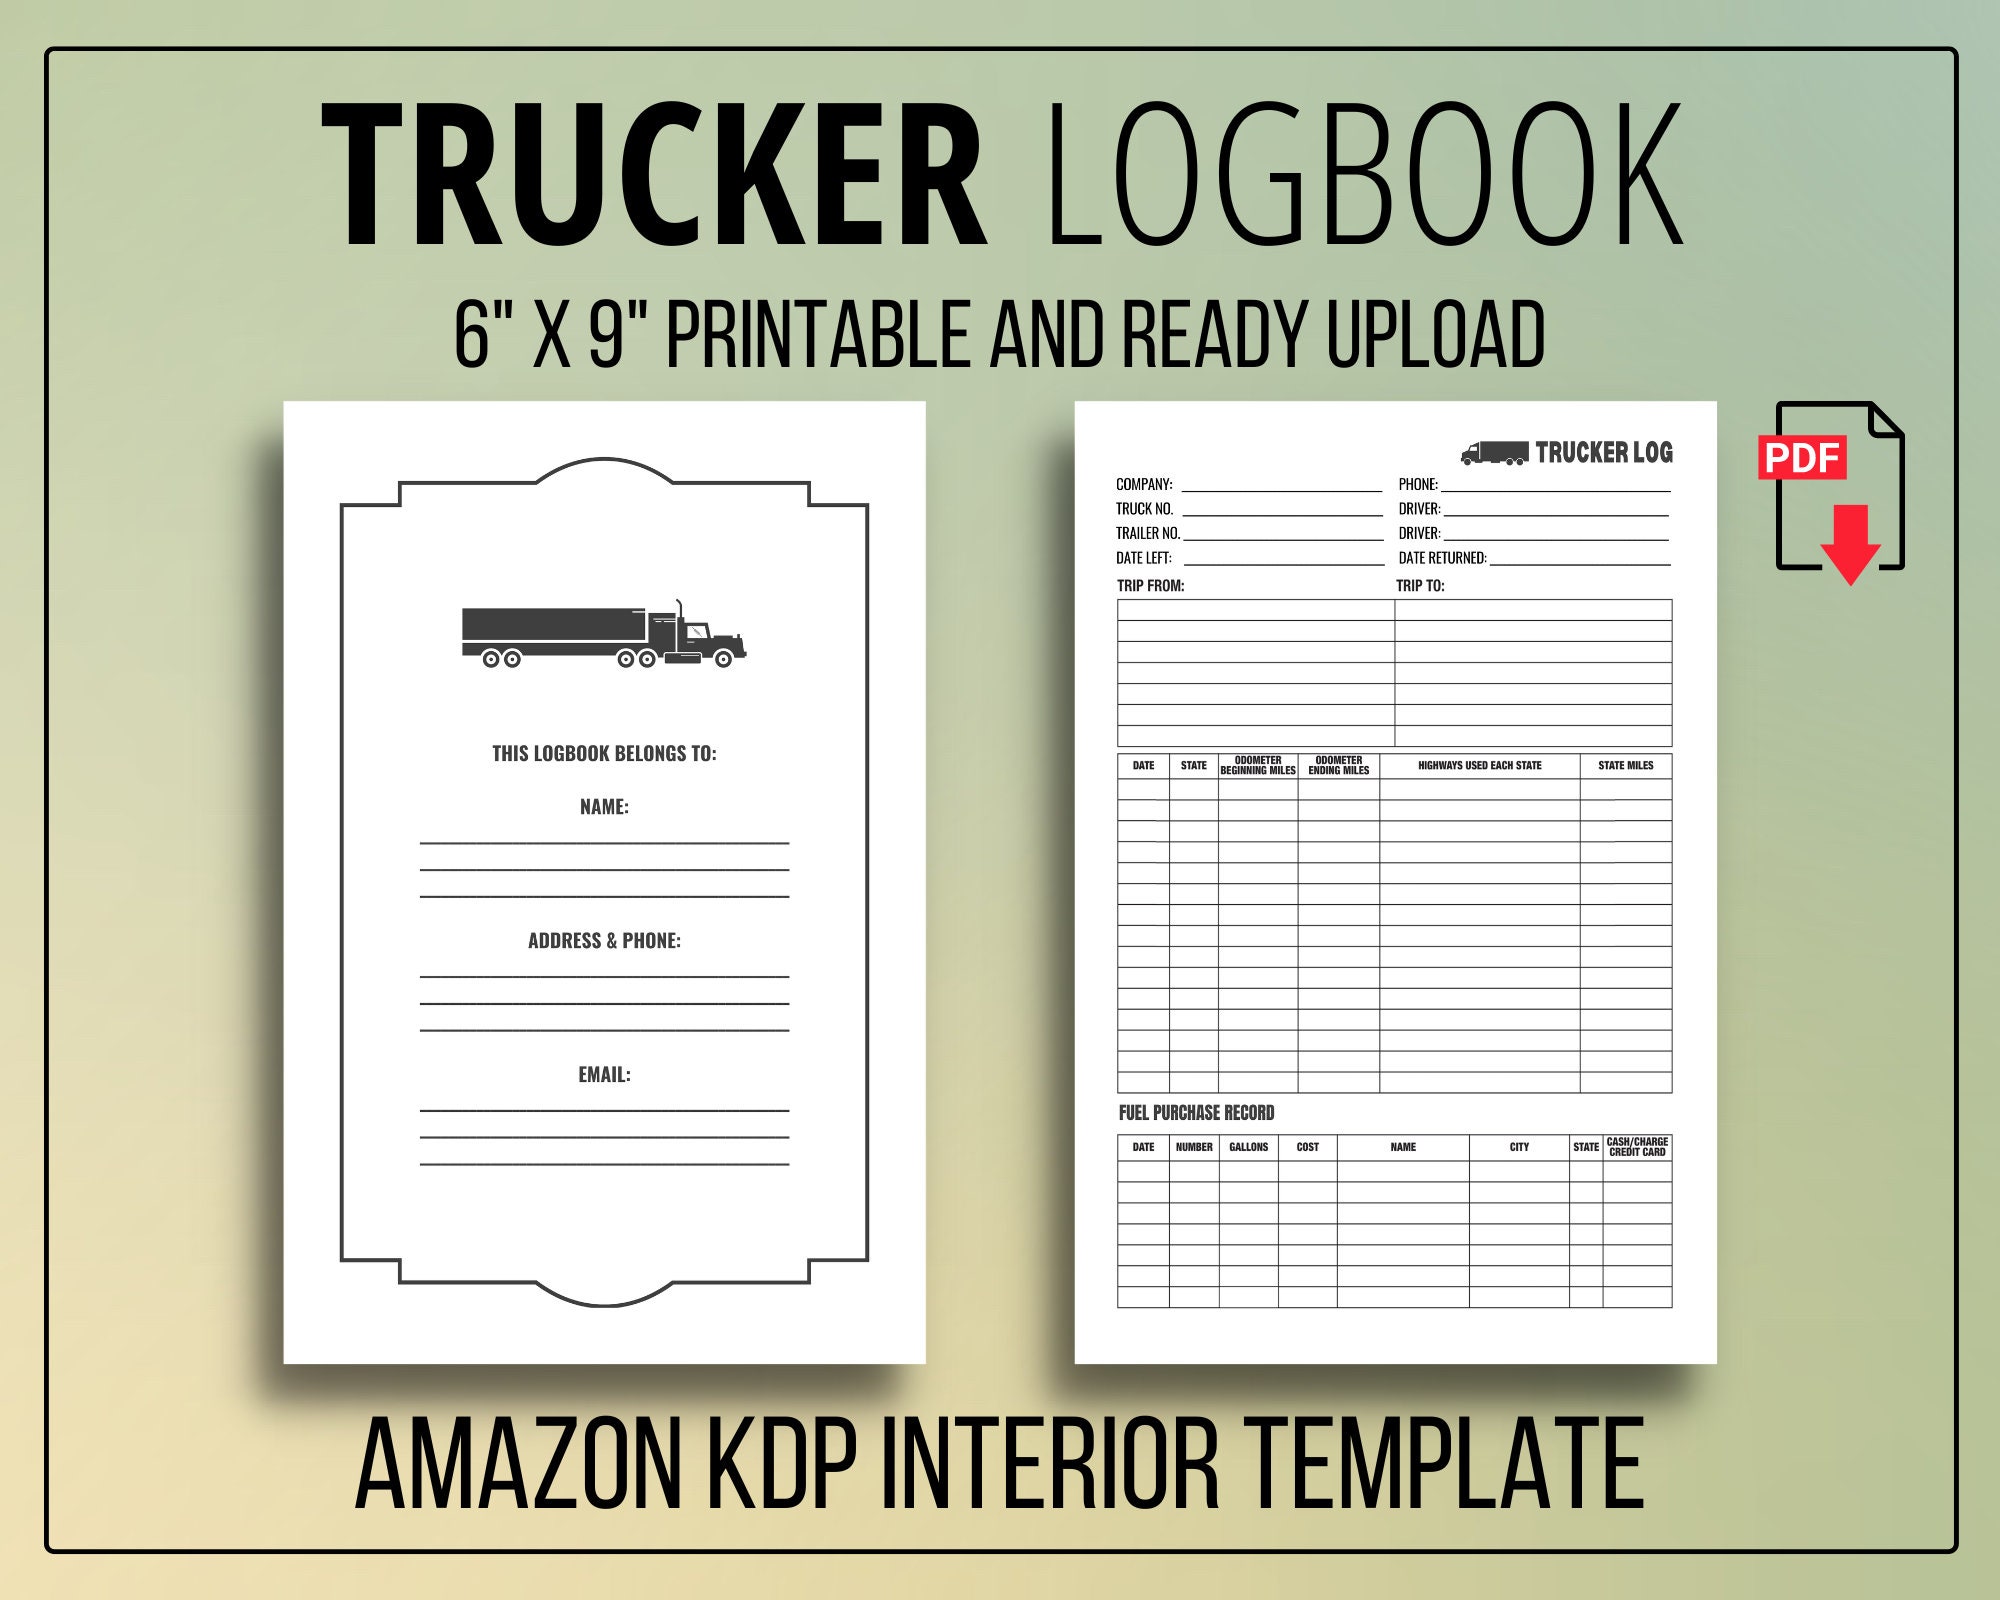 Truckers Don't Go Gray We Turn Chrome: Trucker Log Book for Truck Drivers- 6 X 9 Mileage Log Book Features Date, Odometer, Mileage, Destination. Trucker Gifts for Men